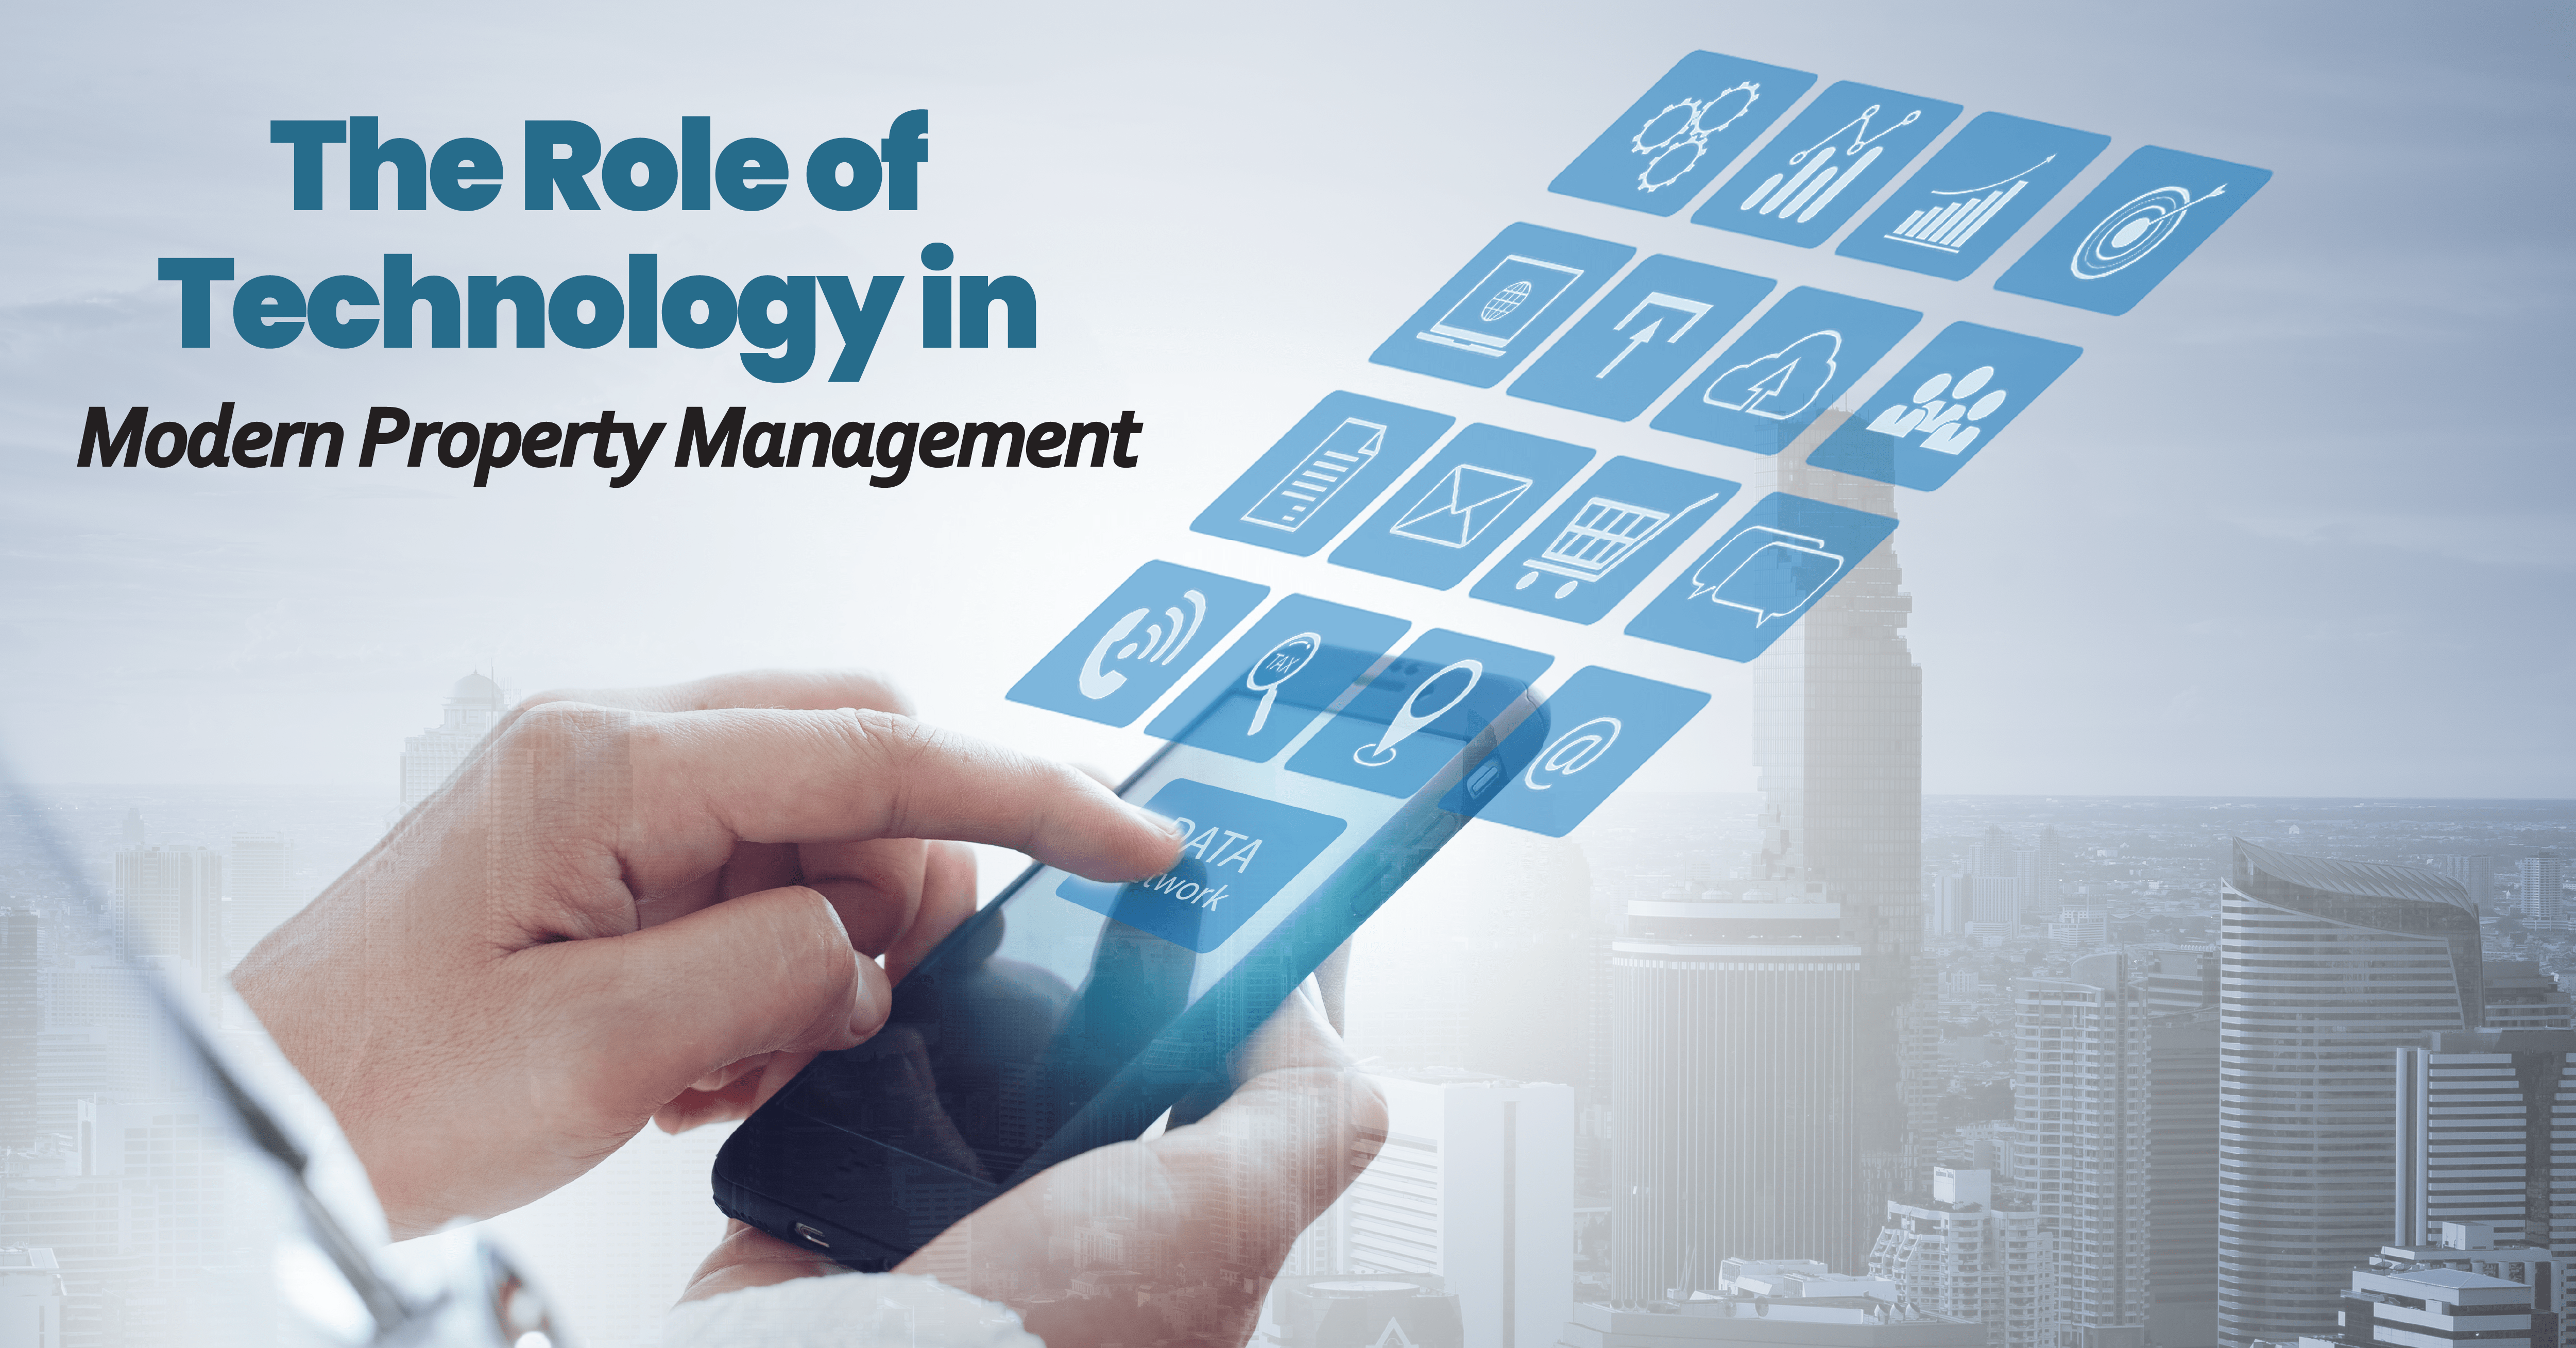 The Role of Technology in Modern Property Management